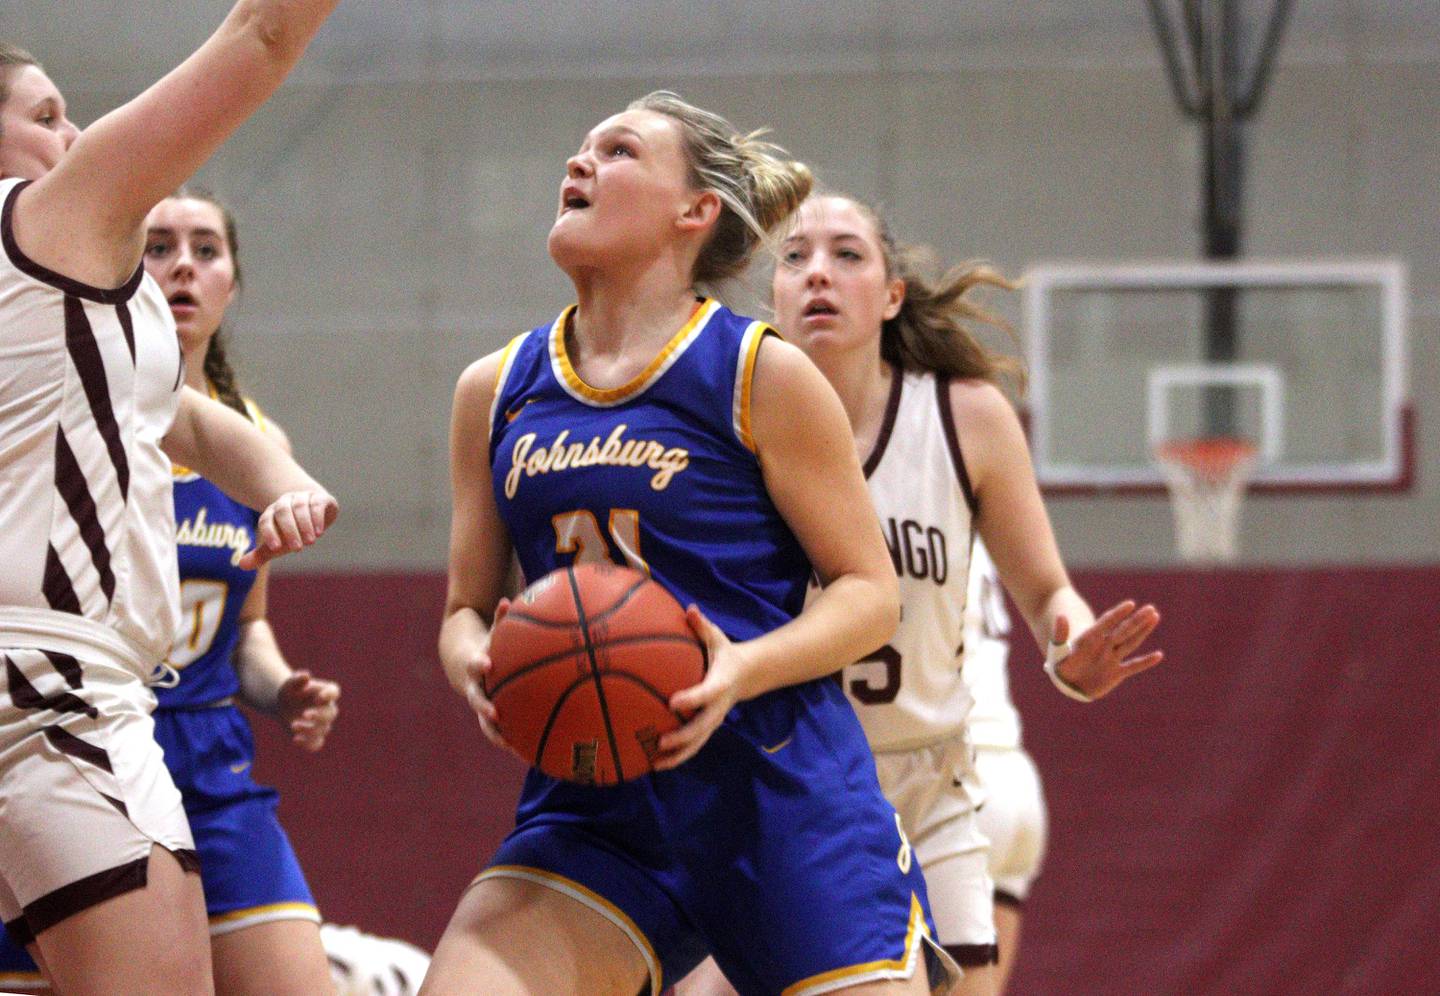 Johnsburg’s Sophie Person works under the hoop in varsity girls basketball at Marengo Tuesday night.